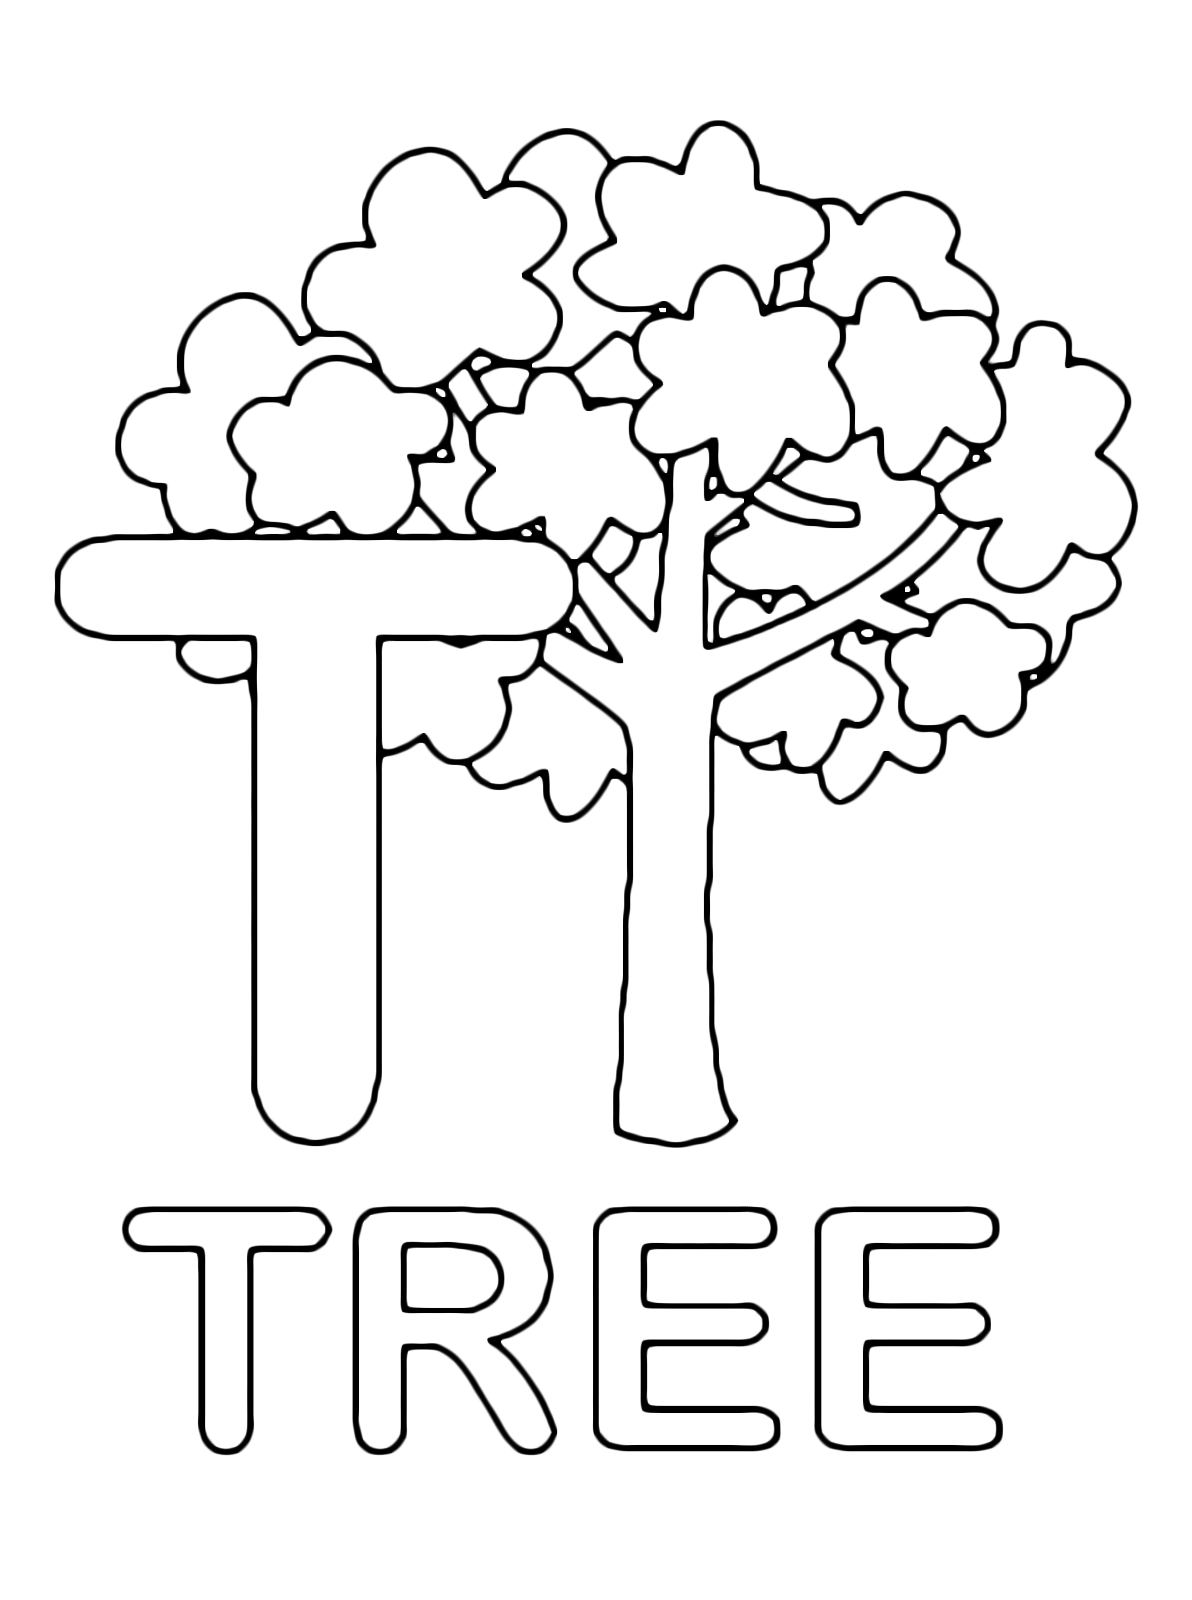 Letters and numbers - T for tree uppercase letter